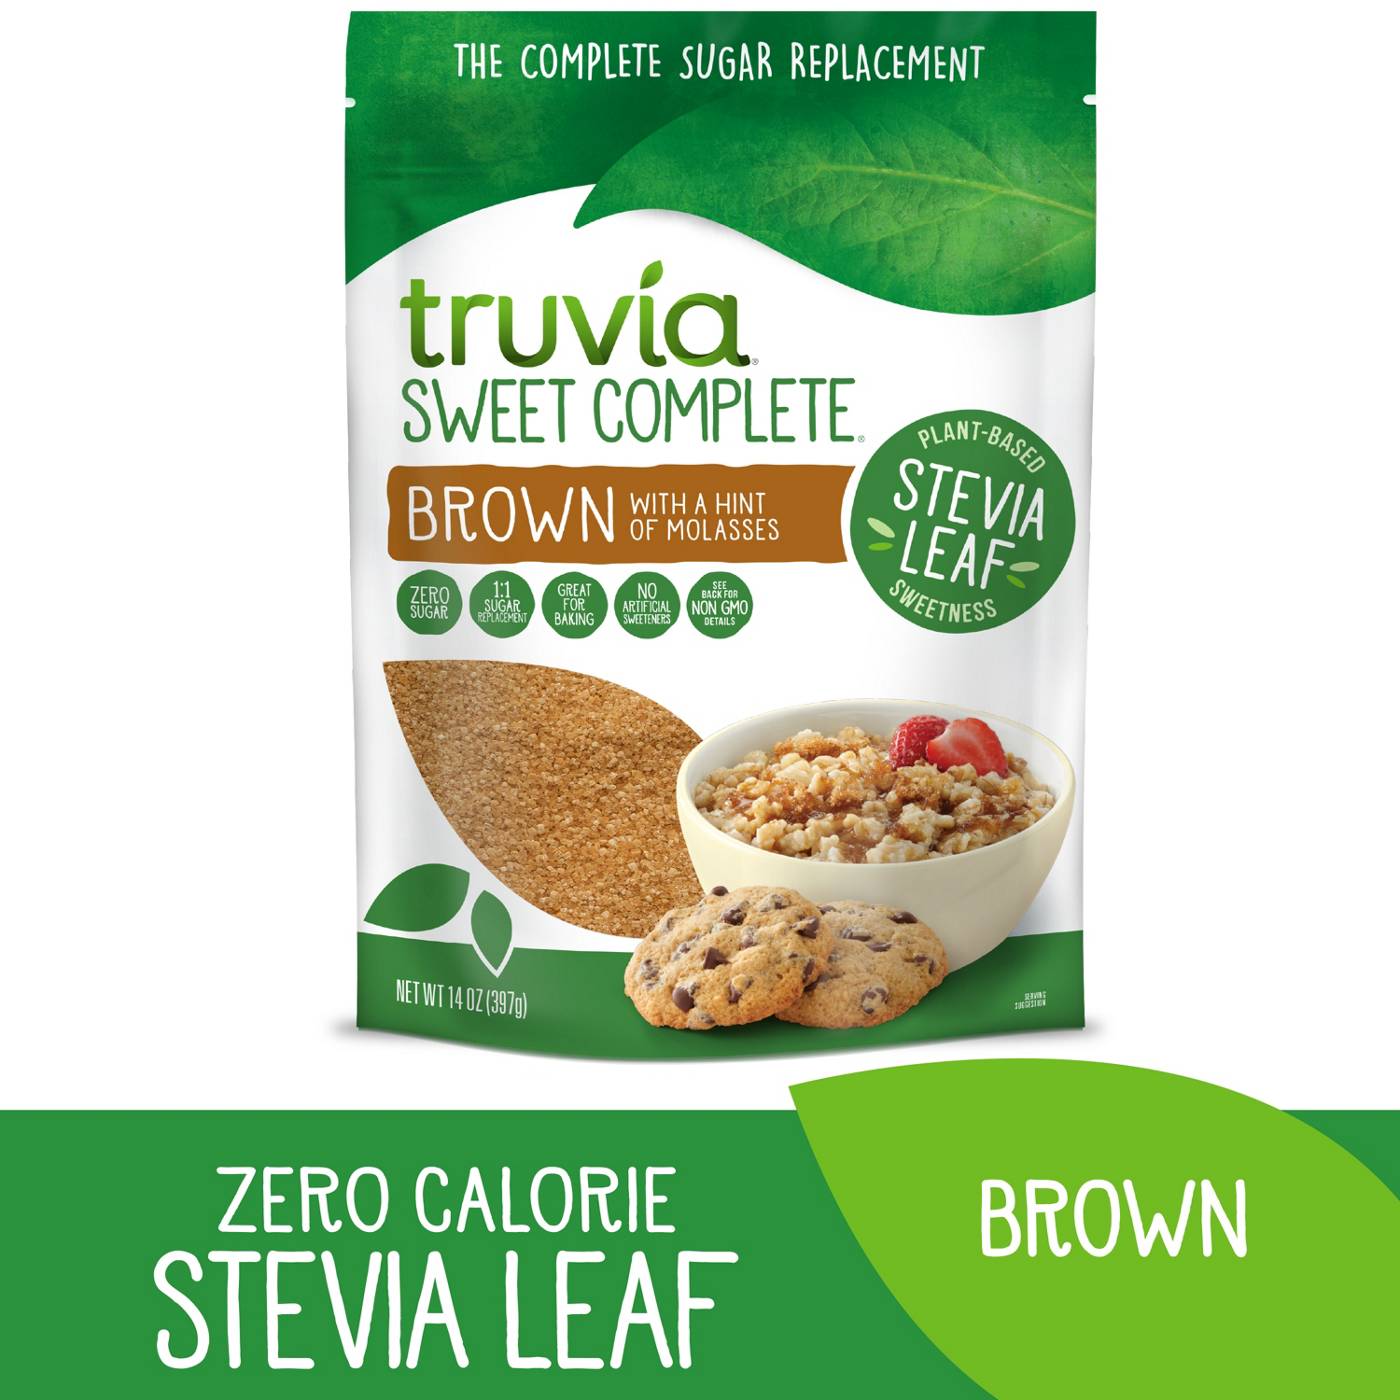 Truvia Sweet Complete Brown Calorie-Free Sweetener with Stevia Leaf Extract; image 5 of 5